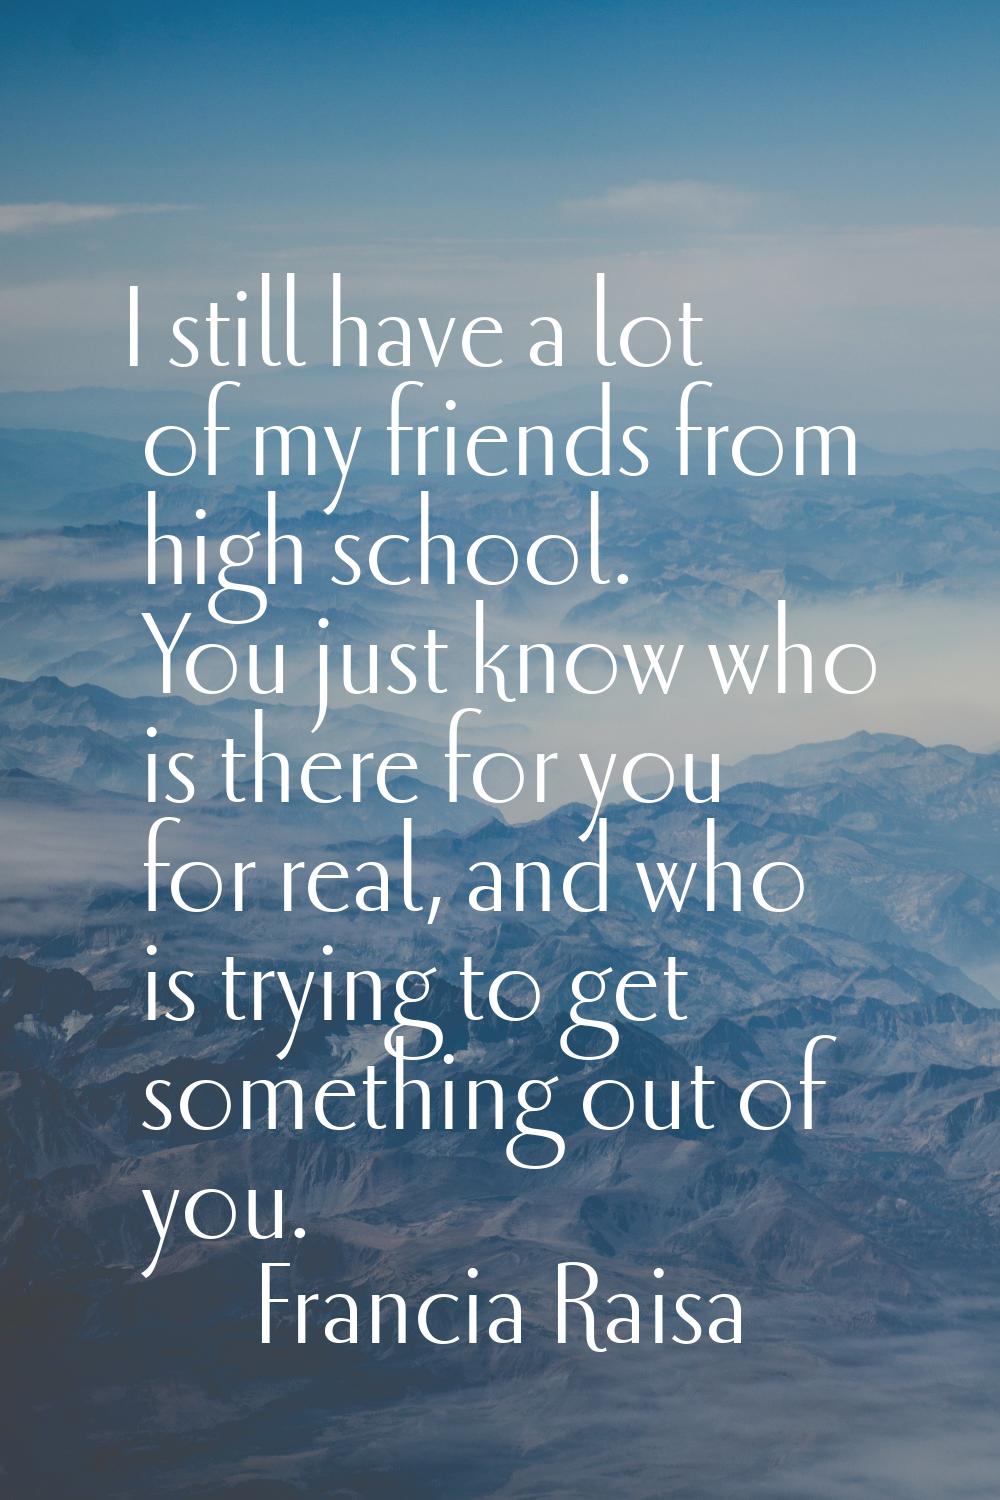 I still have a lot of my friends from high school. You just know who is there for you for real, and